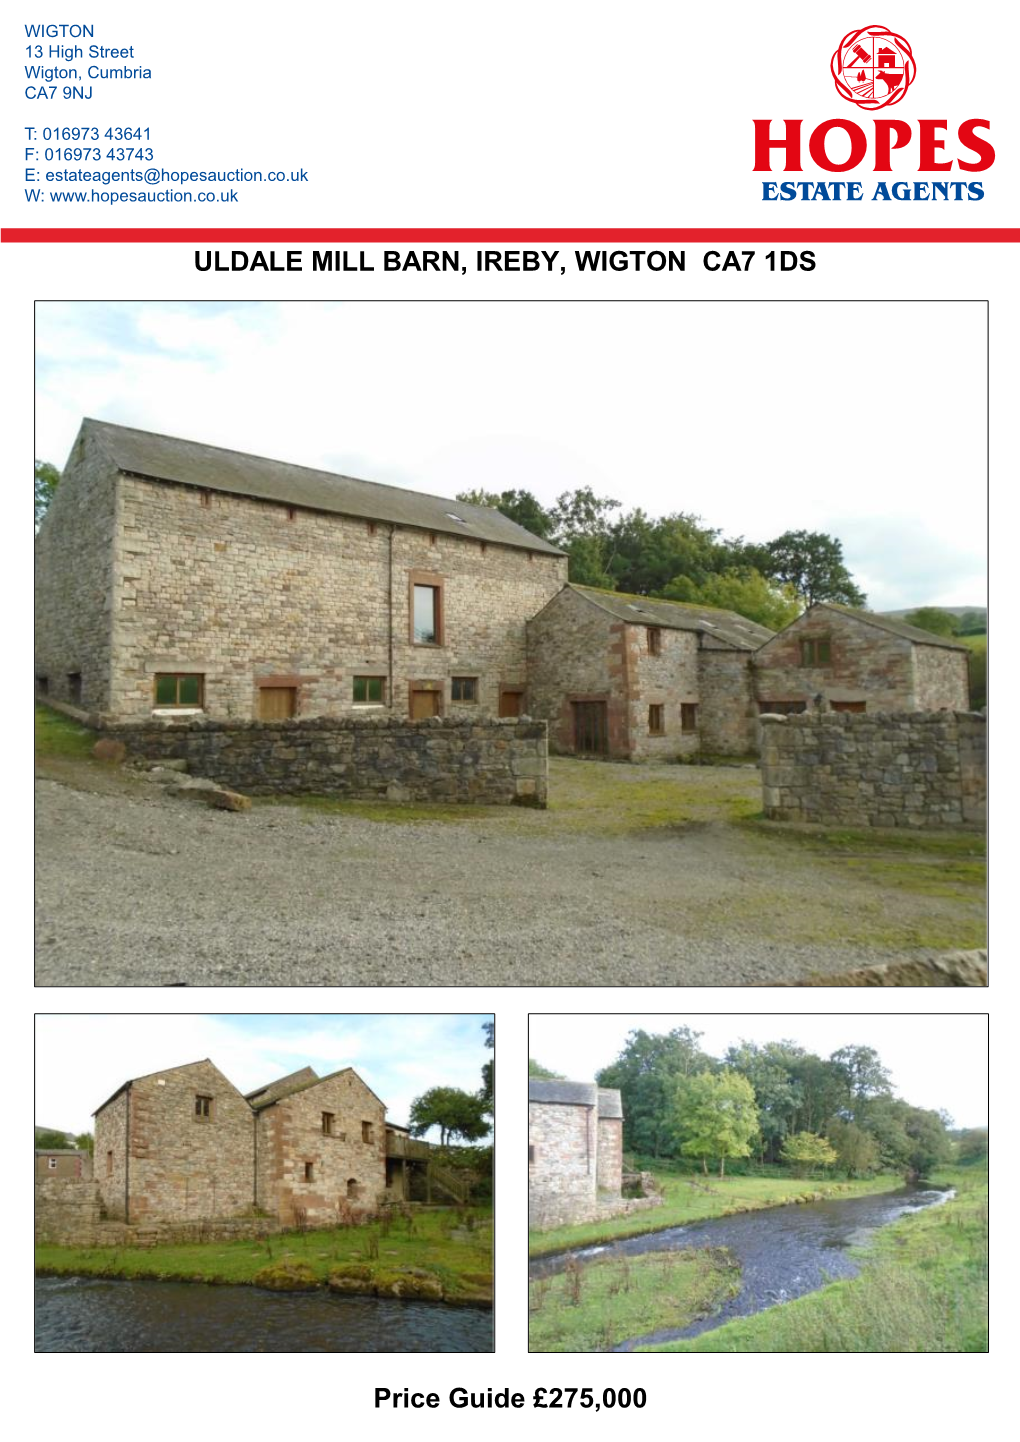 Uldale Mill Barn, Ireby, Wigton Ca7 1Ds